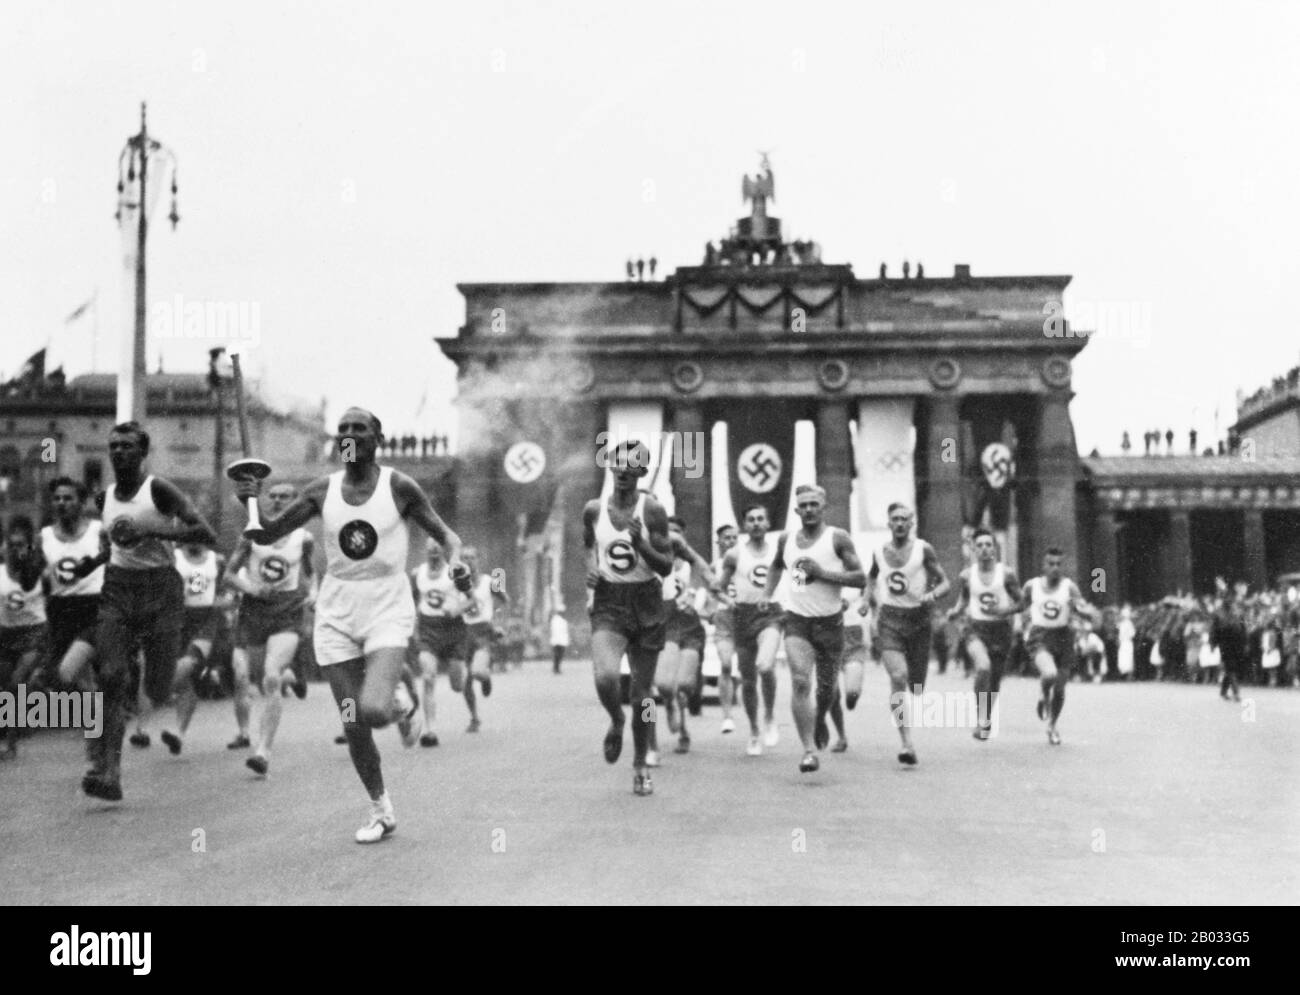 The 1936 Summer Olympics (German: Olympische Sommerspiele 1936), officially known as the Games of the XI Olympiad, was an international multi-sport event that was held in 1936 in Berlin, Germany.  Reich Chancellor Adolf Hitler saw the Games as an opportunity to promote his government and ideals of racial supremacy, Stock Photo